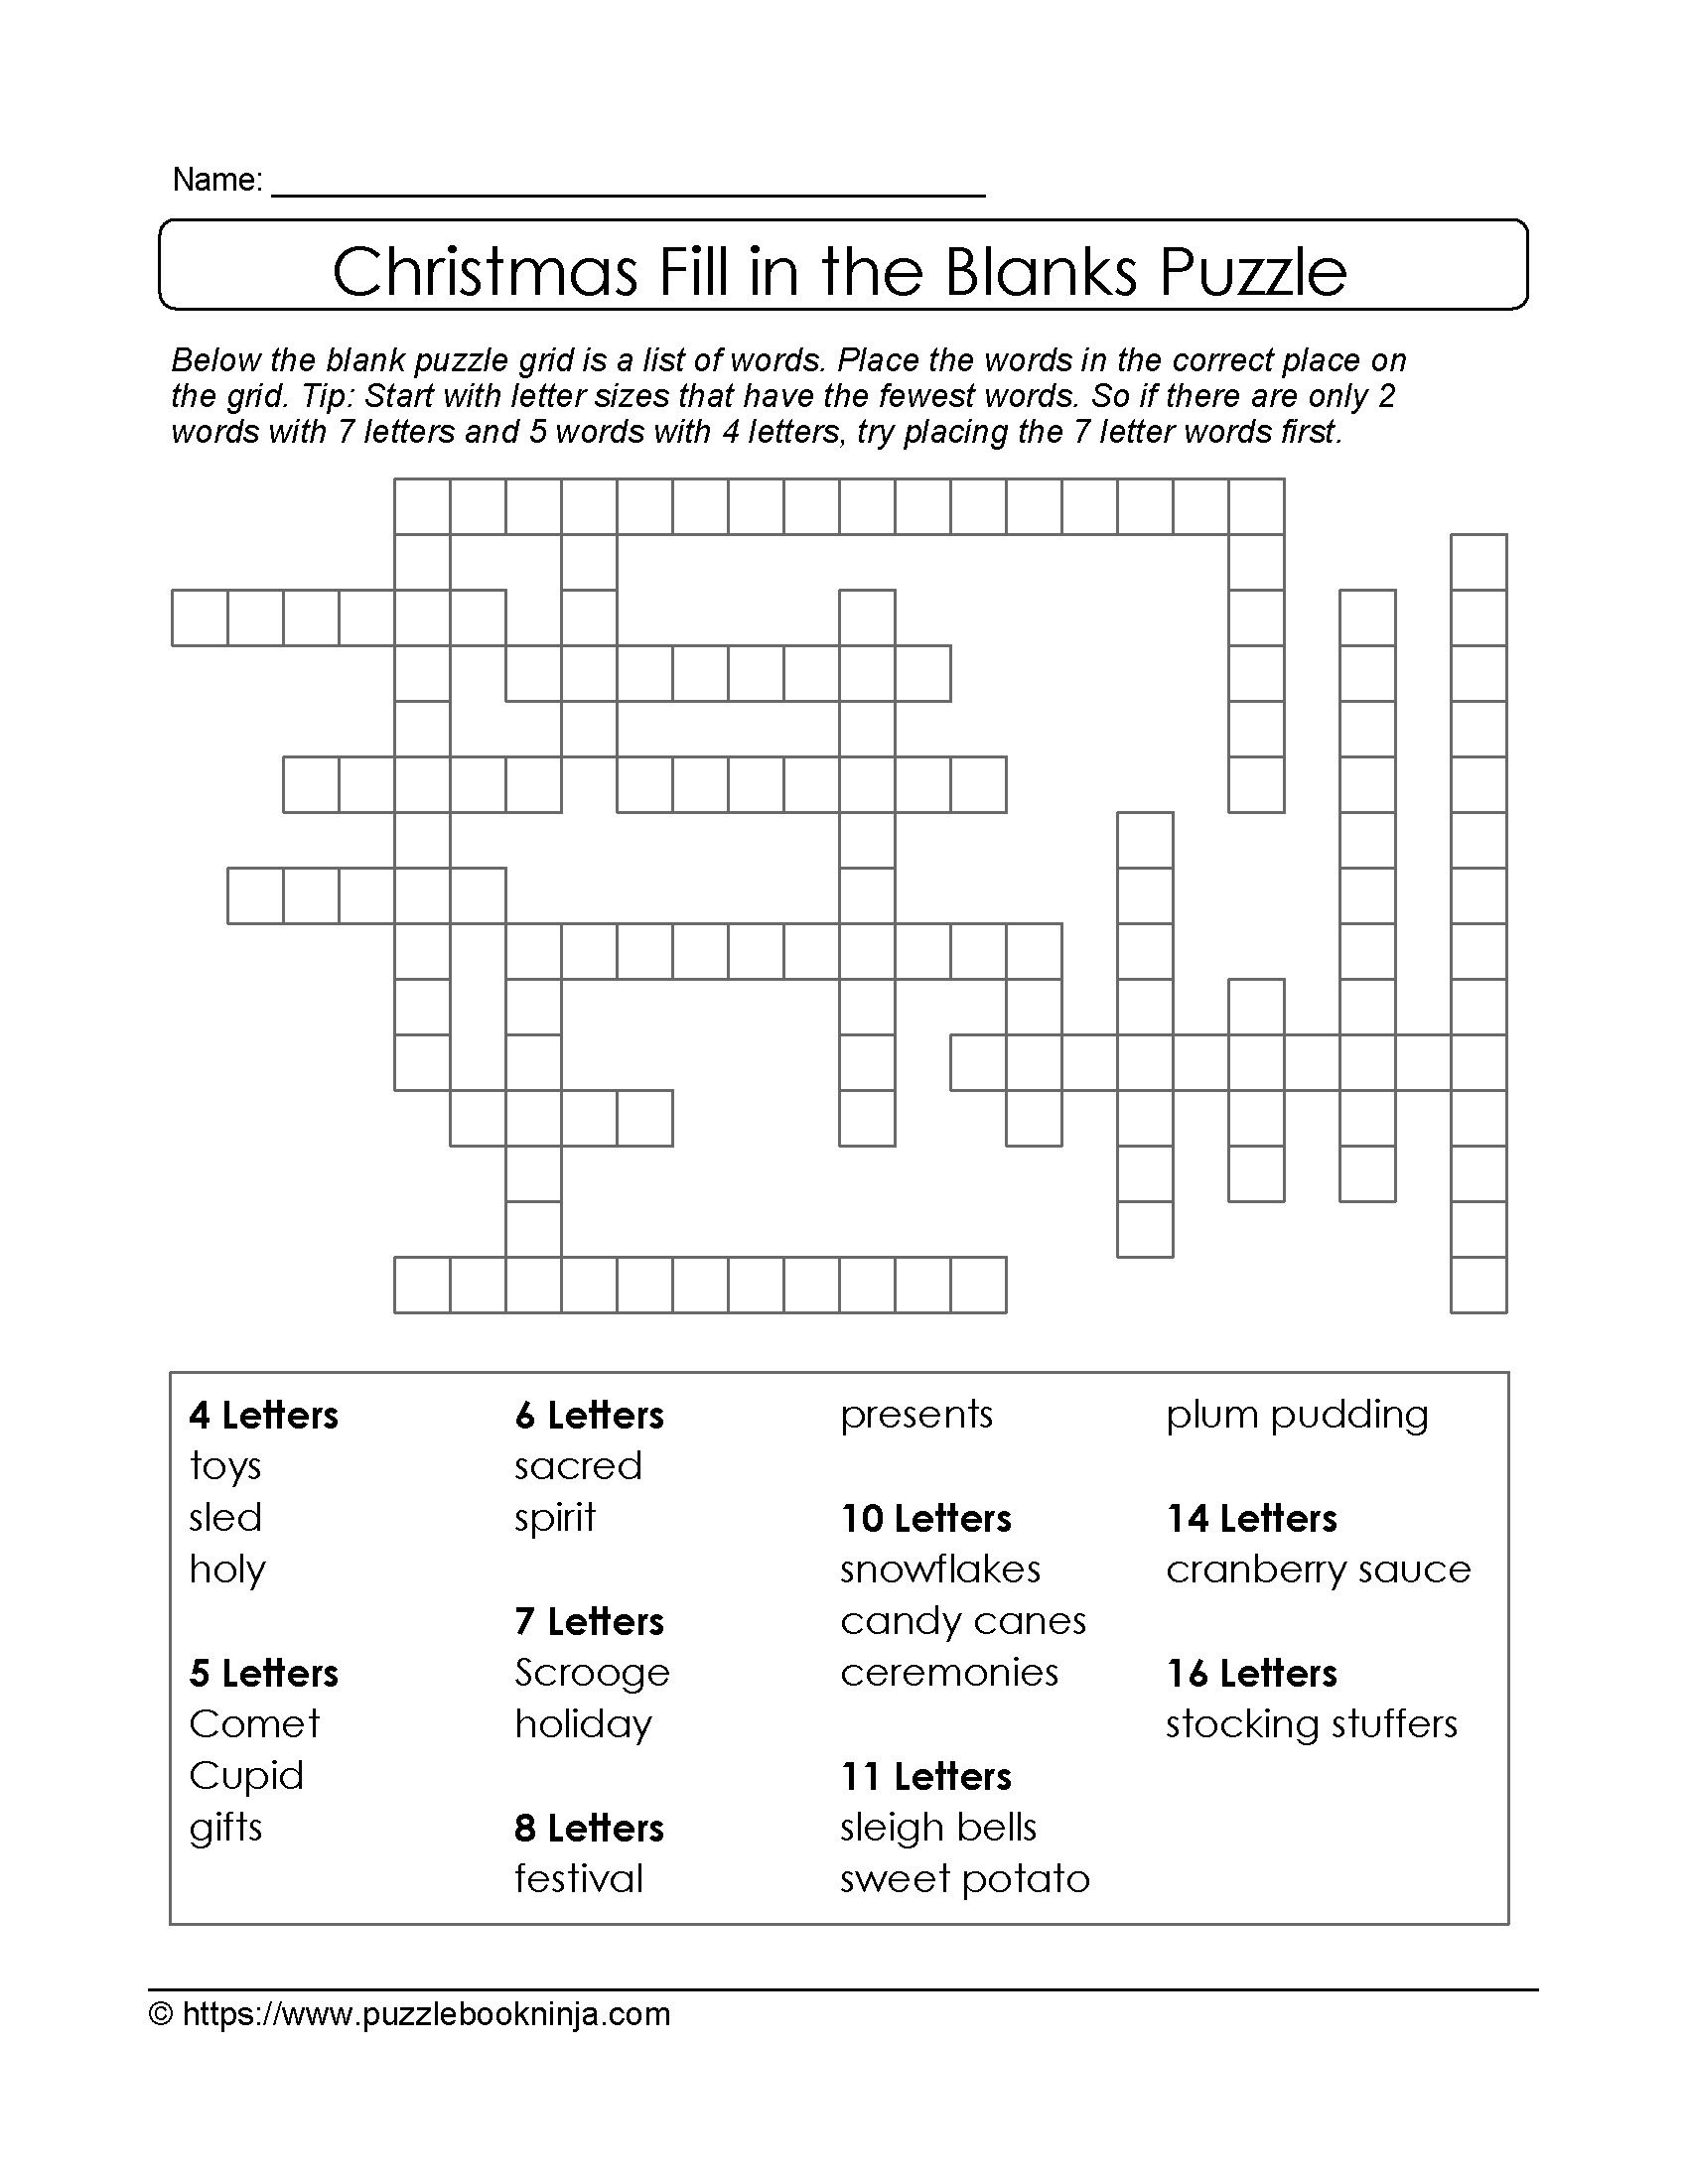 Puzzles To Print. Free Xmas Theme Fill In The Blanks Puzzle - Printable Blank Crossword